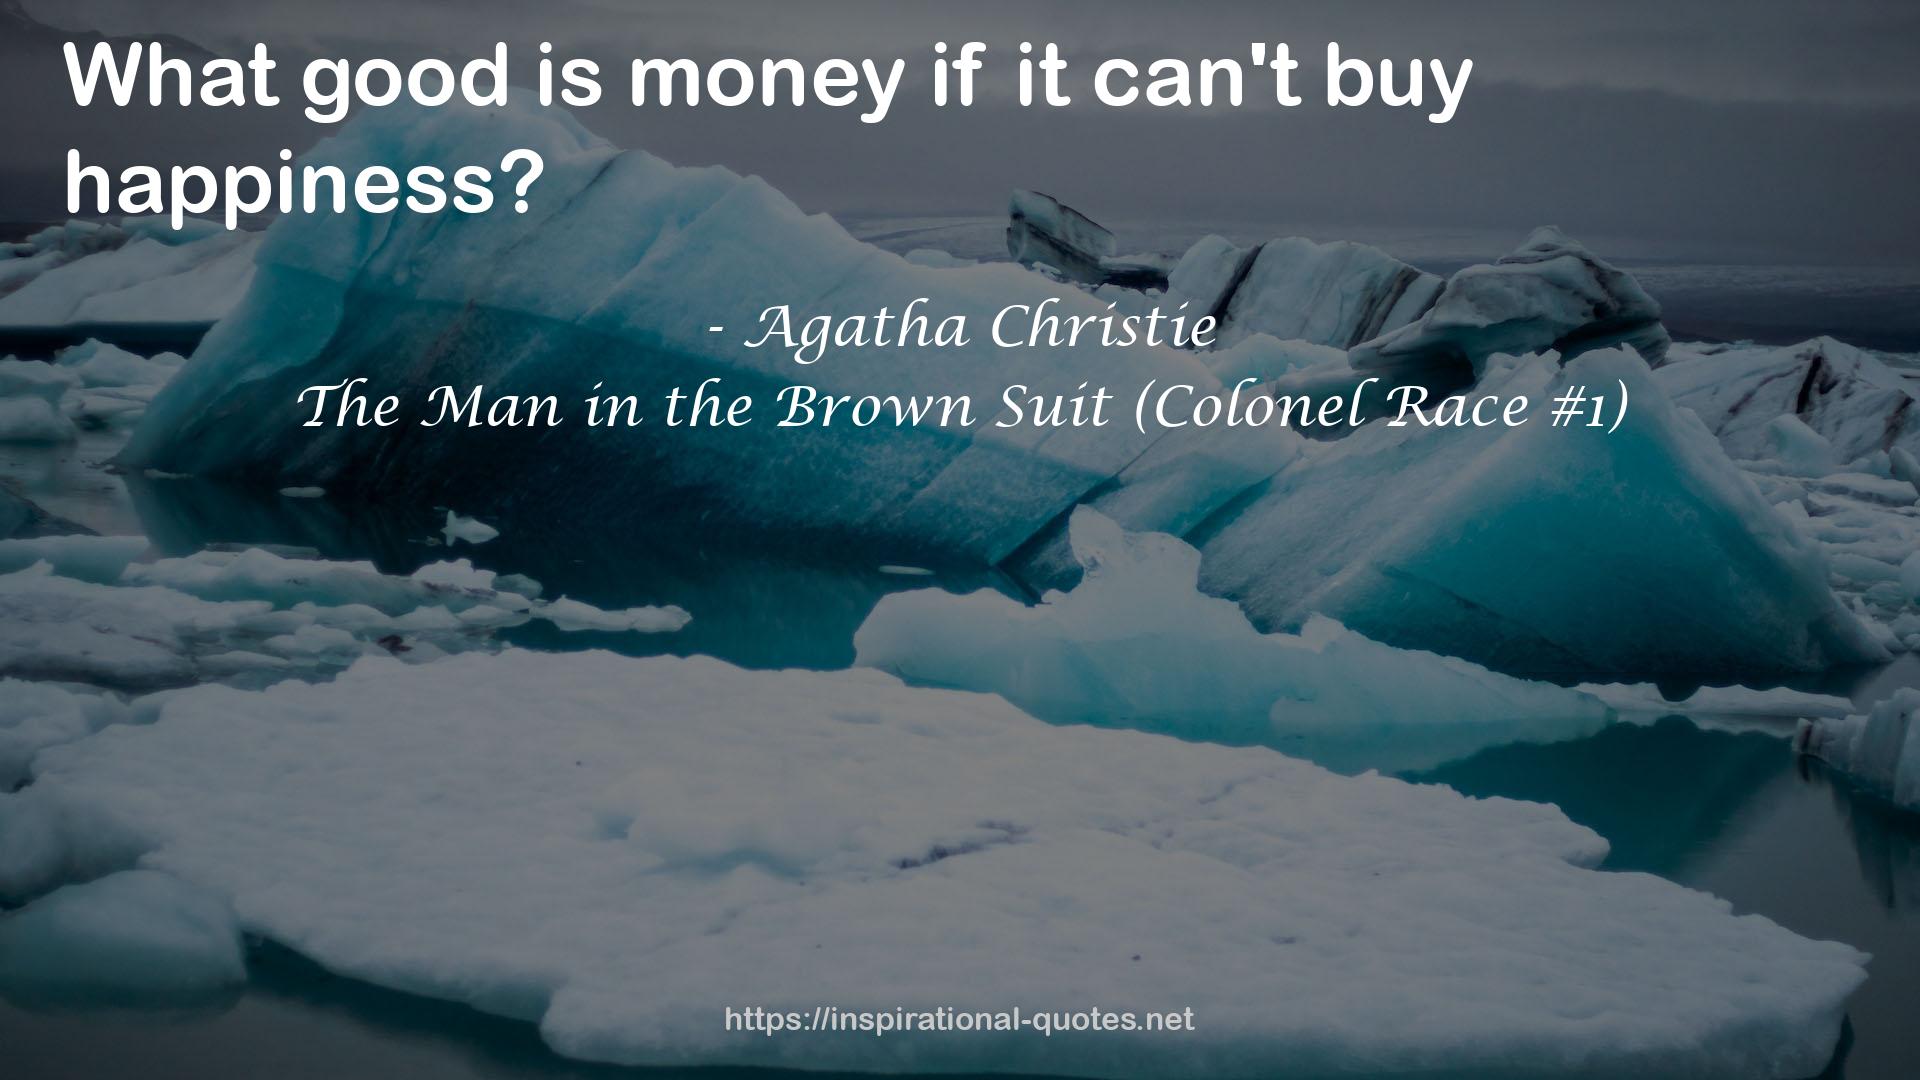 The Man in the Brown Suit (Colonel Race #1) QUOTES